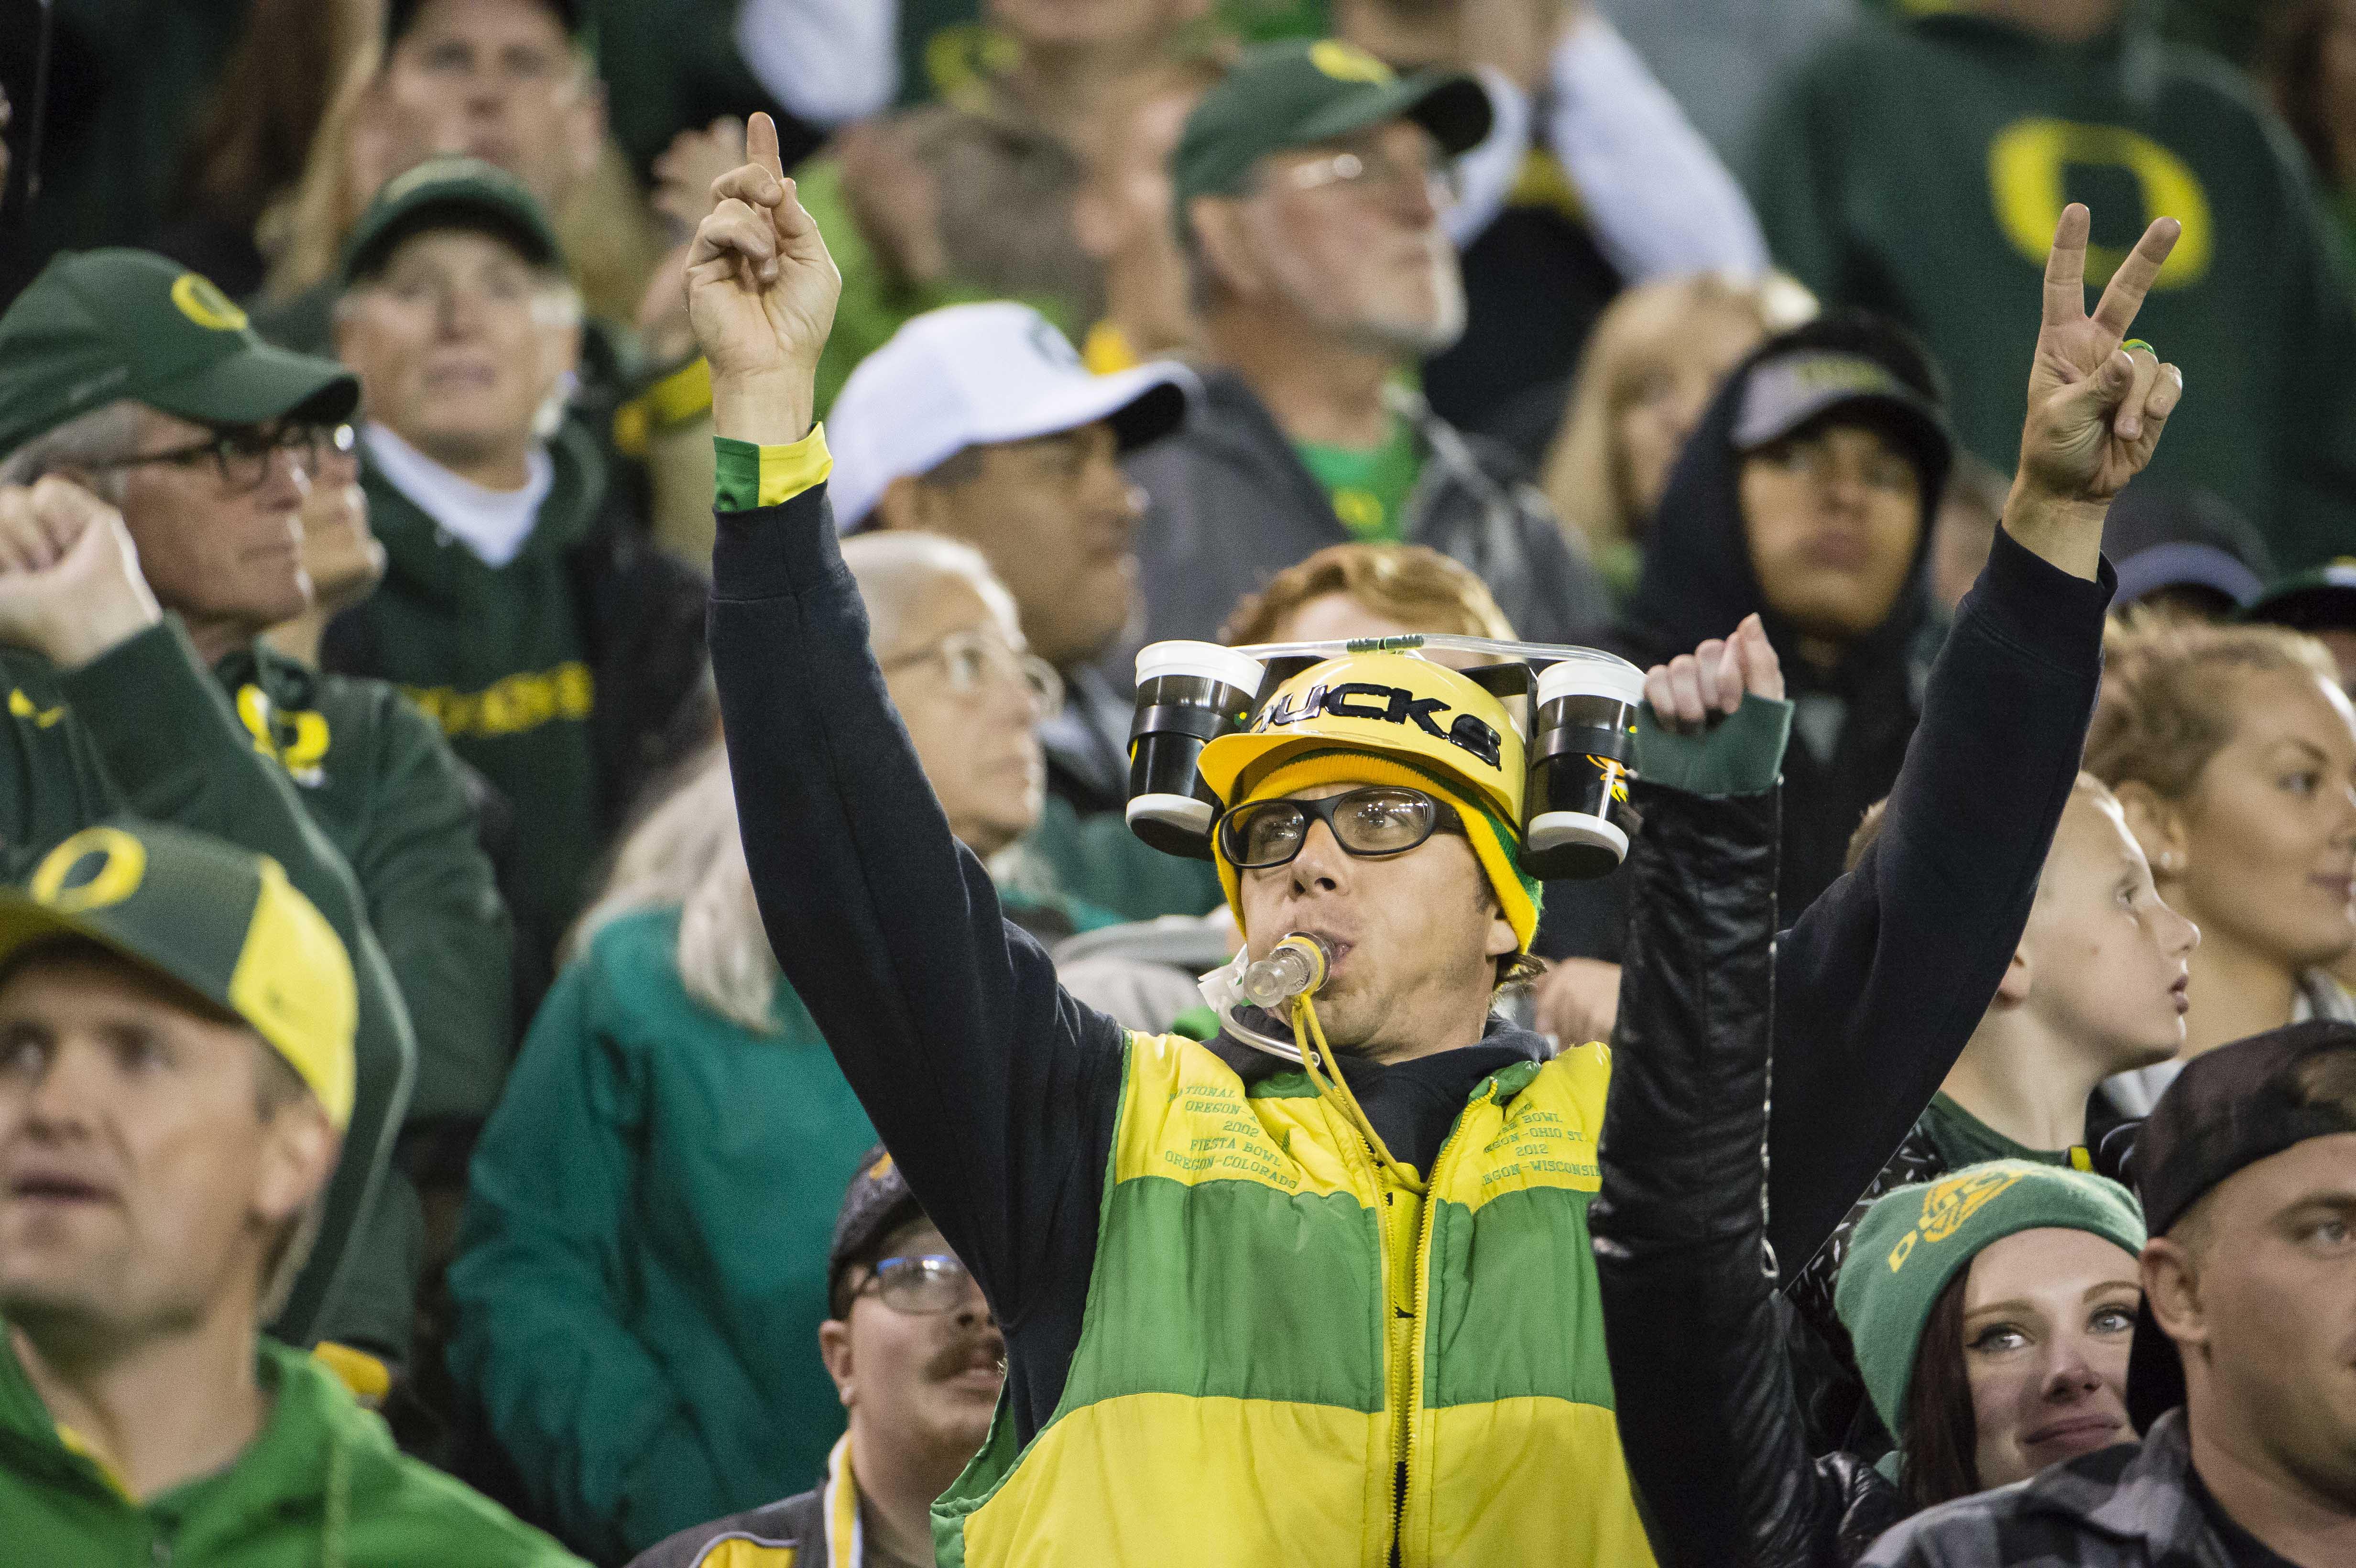 Autzen Stadium to Offer Expanded Concessions at Lower Prices Starting in 20194928 x 3280